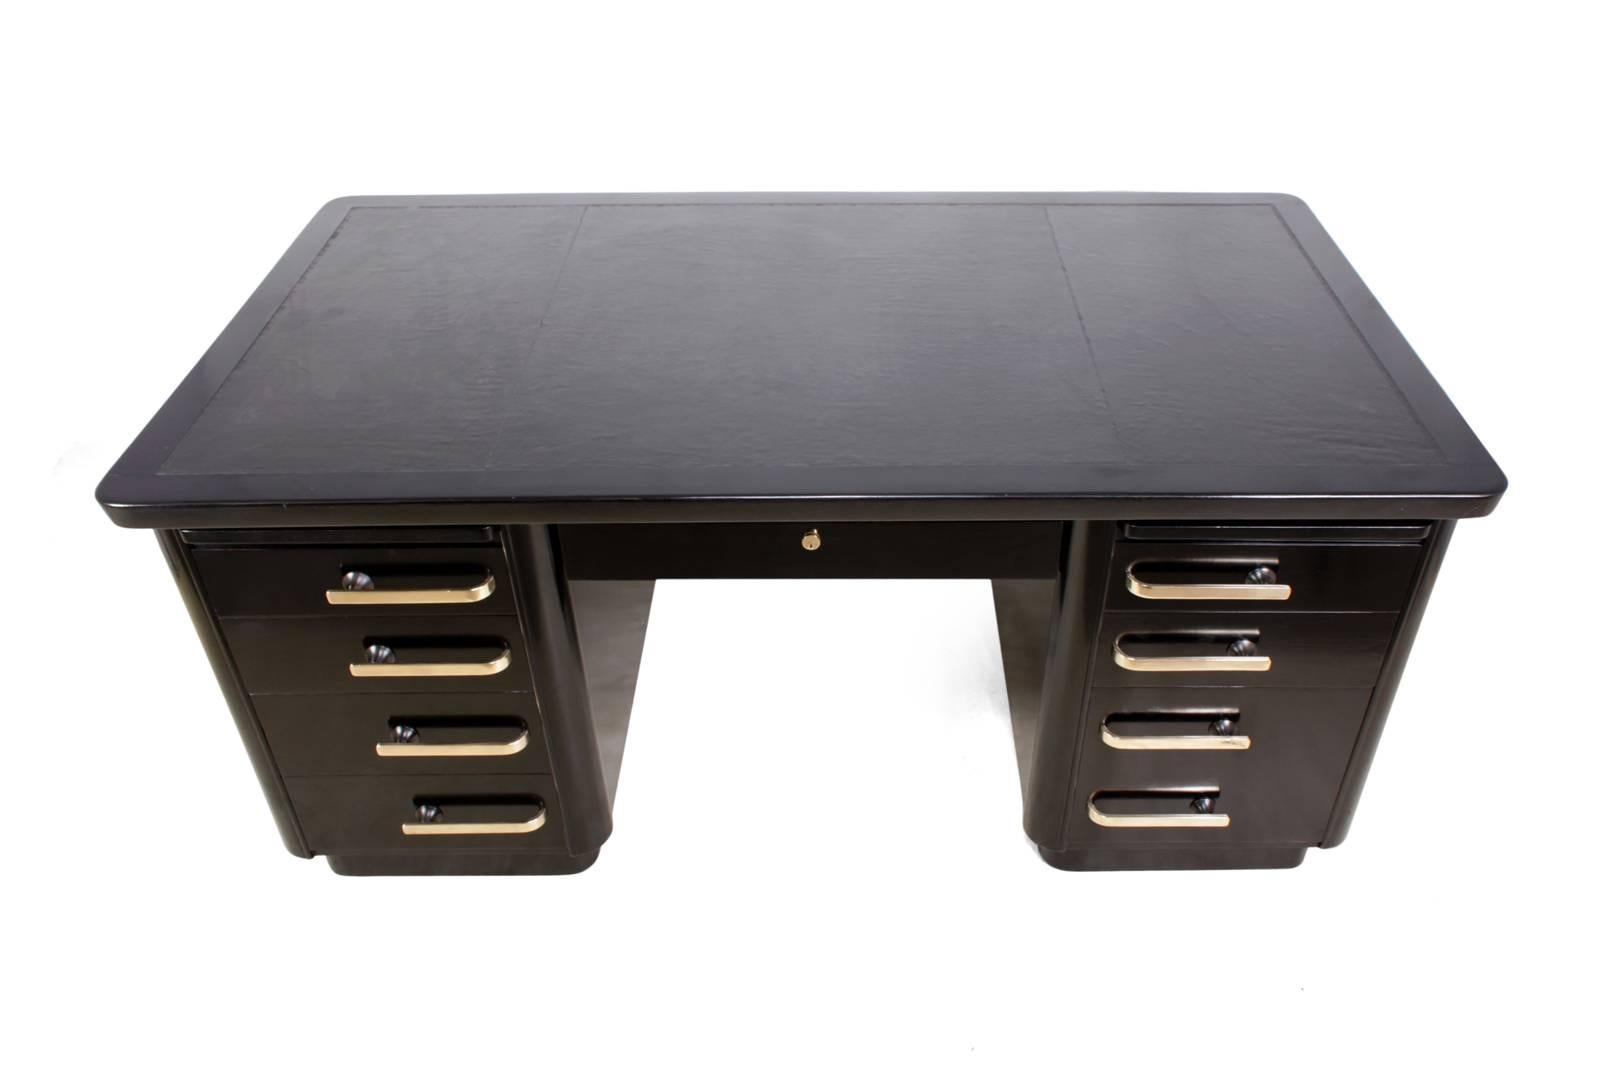 Art Deco desk in black piano lacquer
Produced in the 1950s this desk has a new leather top with polished bronze handles, pen slide at the top, filing drawer to the lower right it has been polished black to a piano type finish, this desk has two